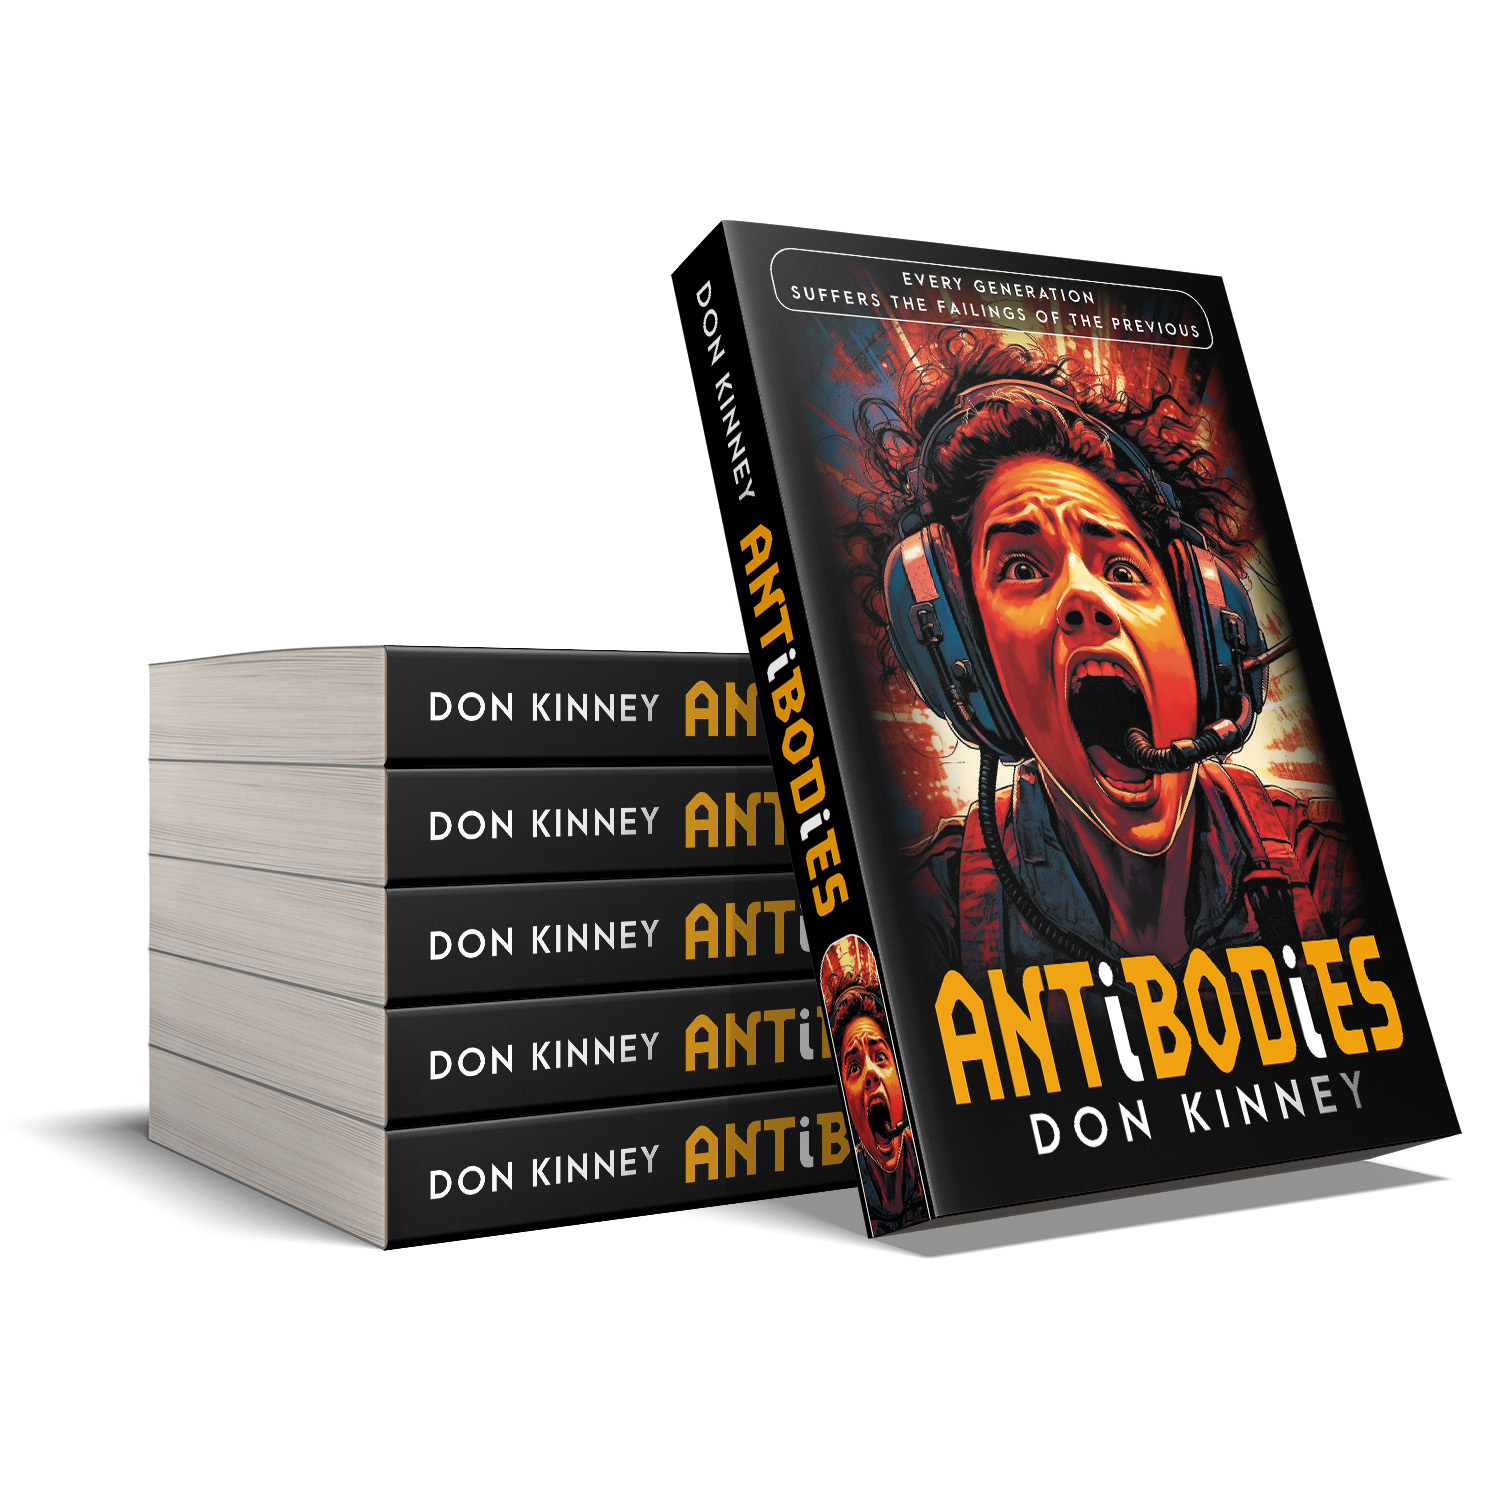 'AntiBodies' is a dark symbiotic science fiction novel. The author is Don Kinney. The book cover design is by Mark Thomas. To learn more about what Mark could do for your book, please visit coverness.com.